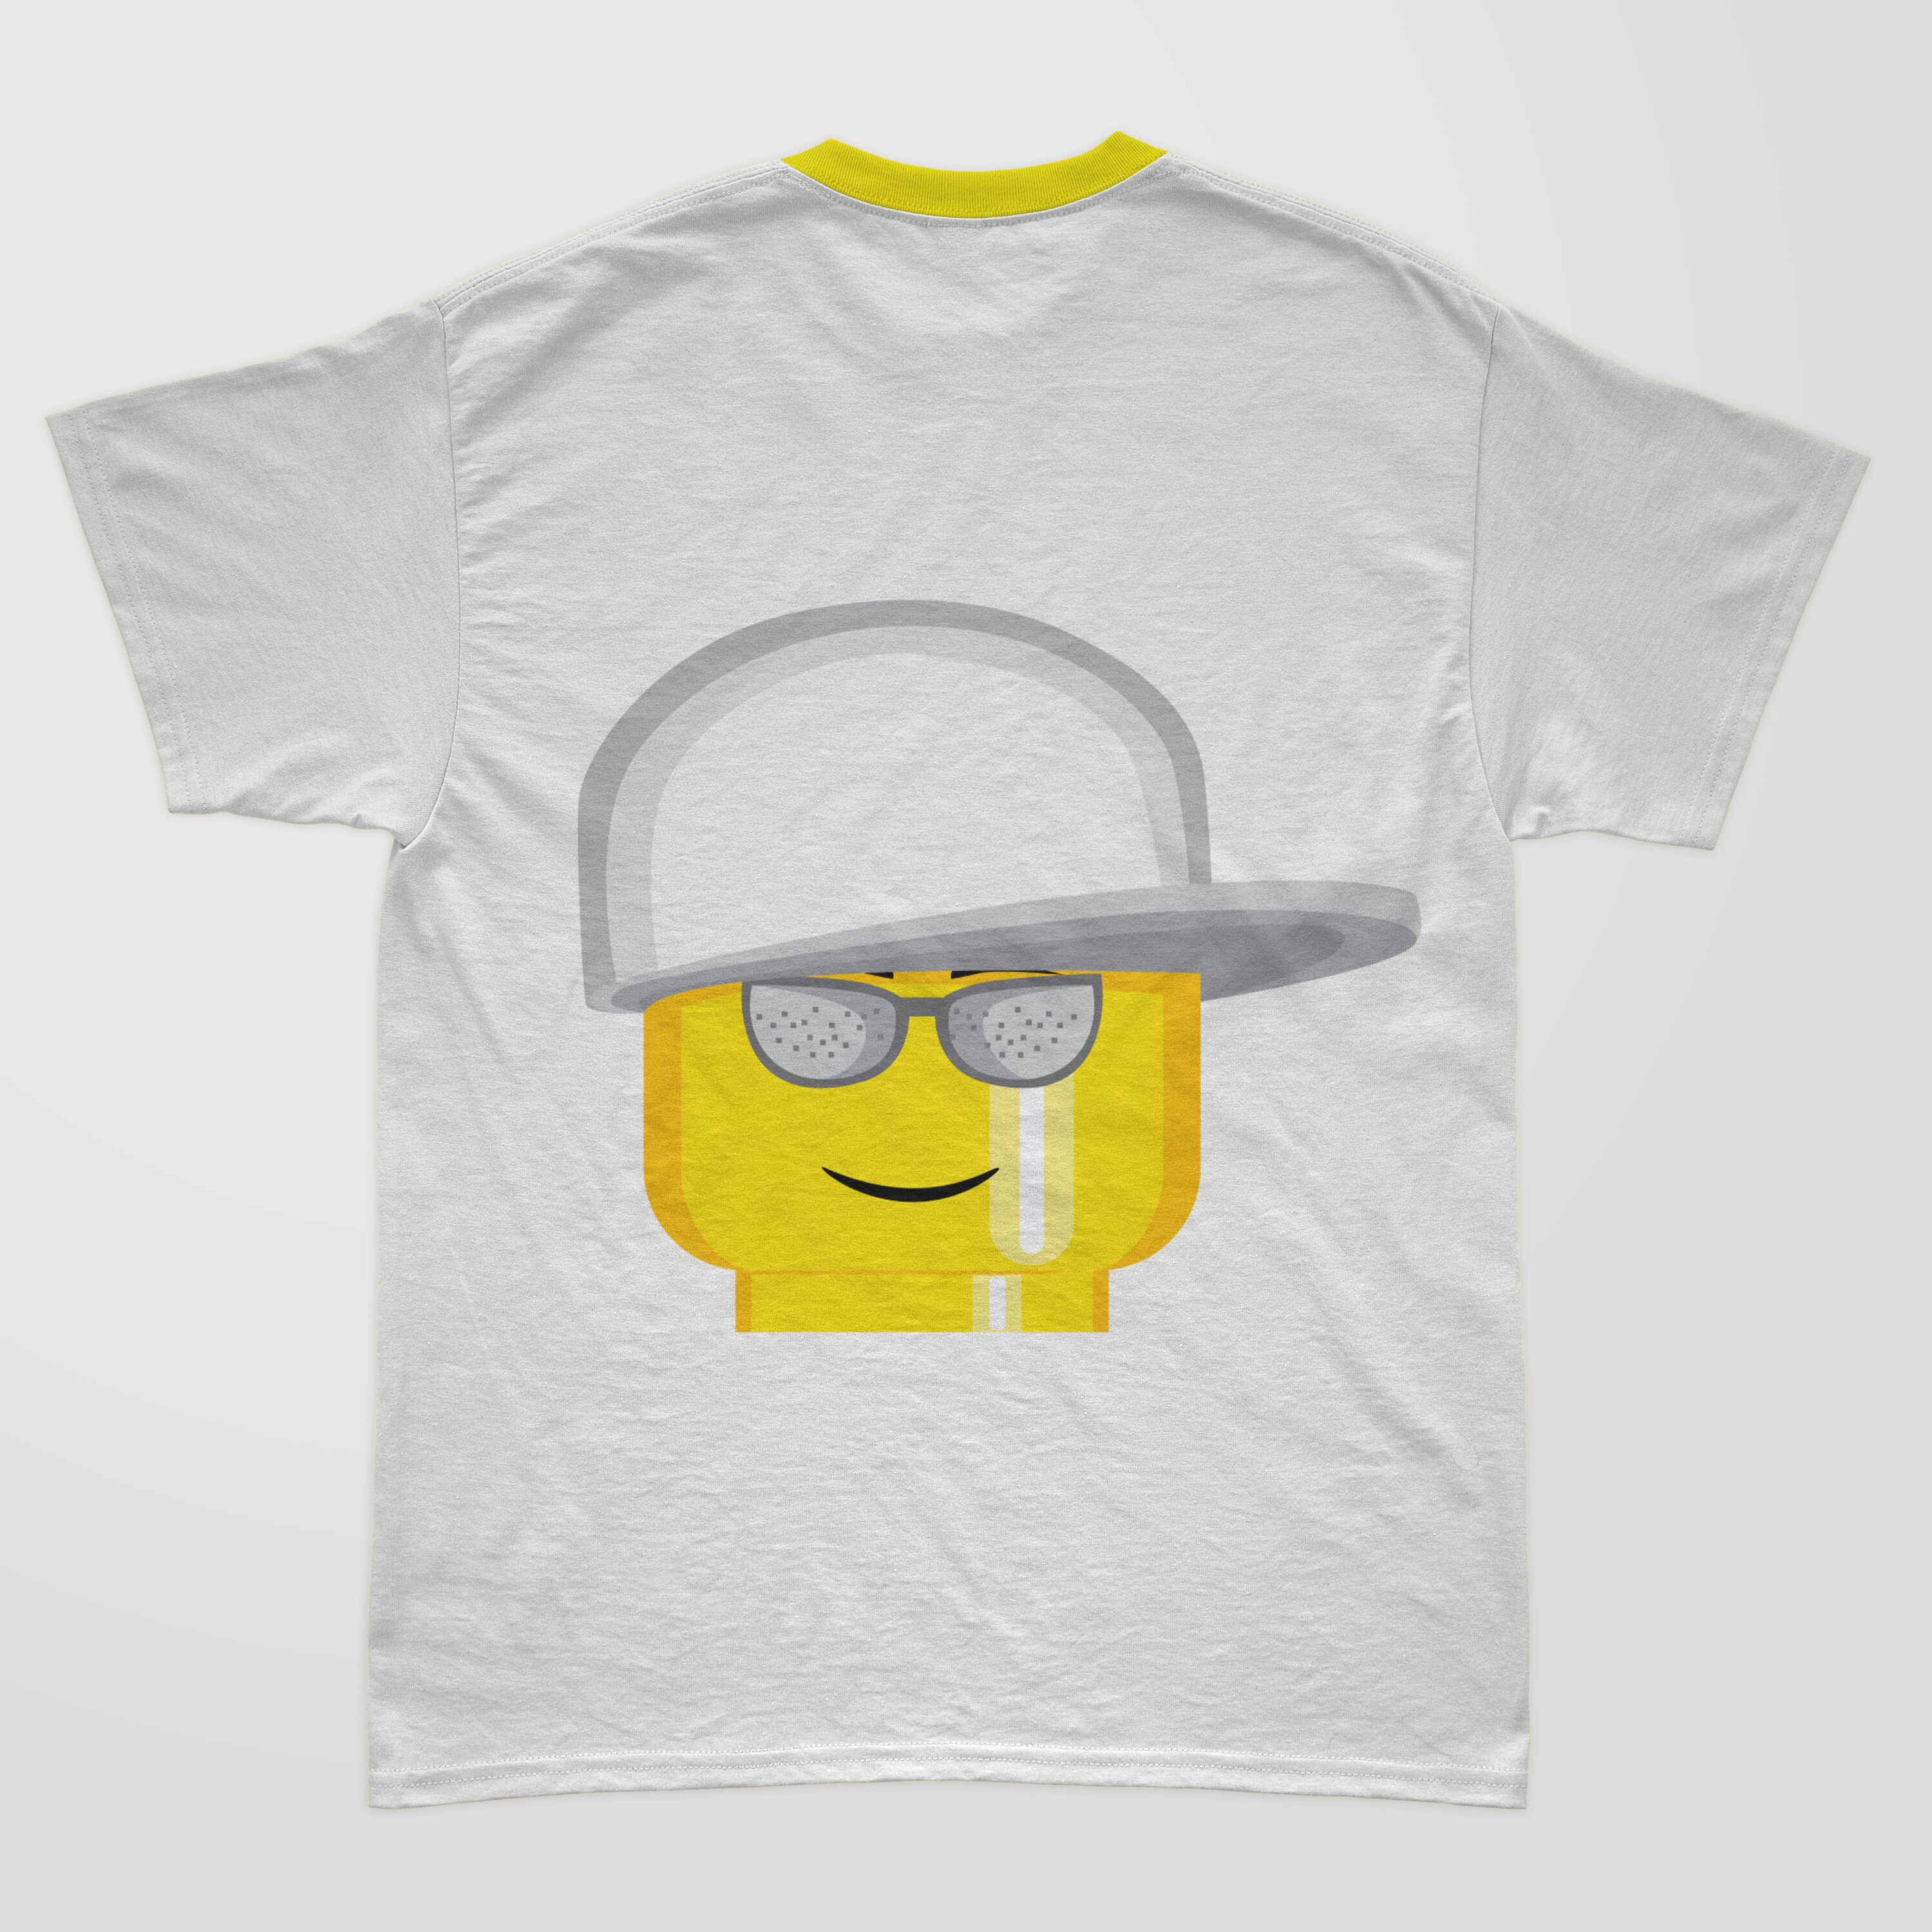 Lego character in a white cap.